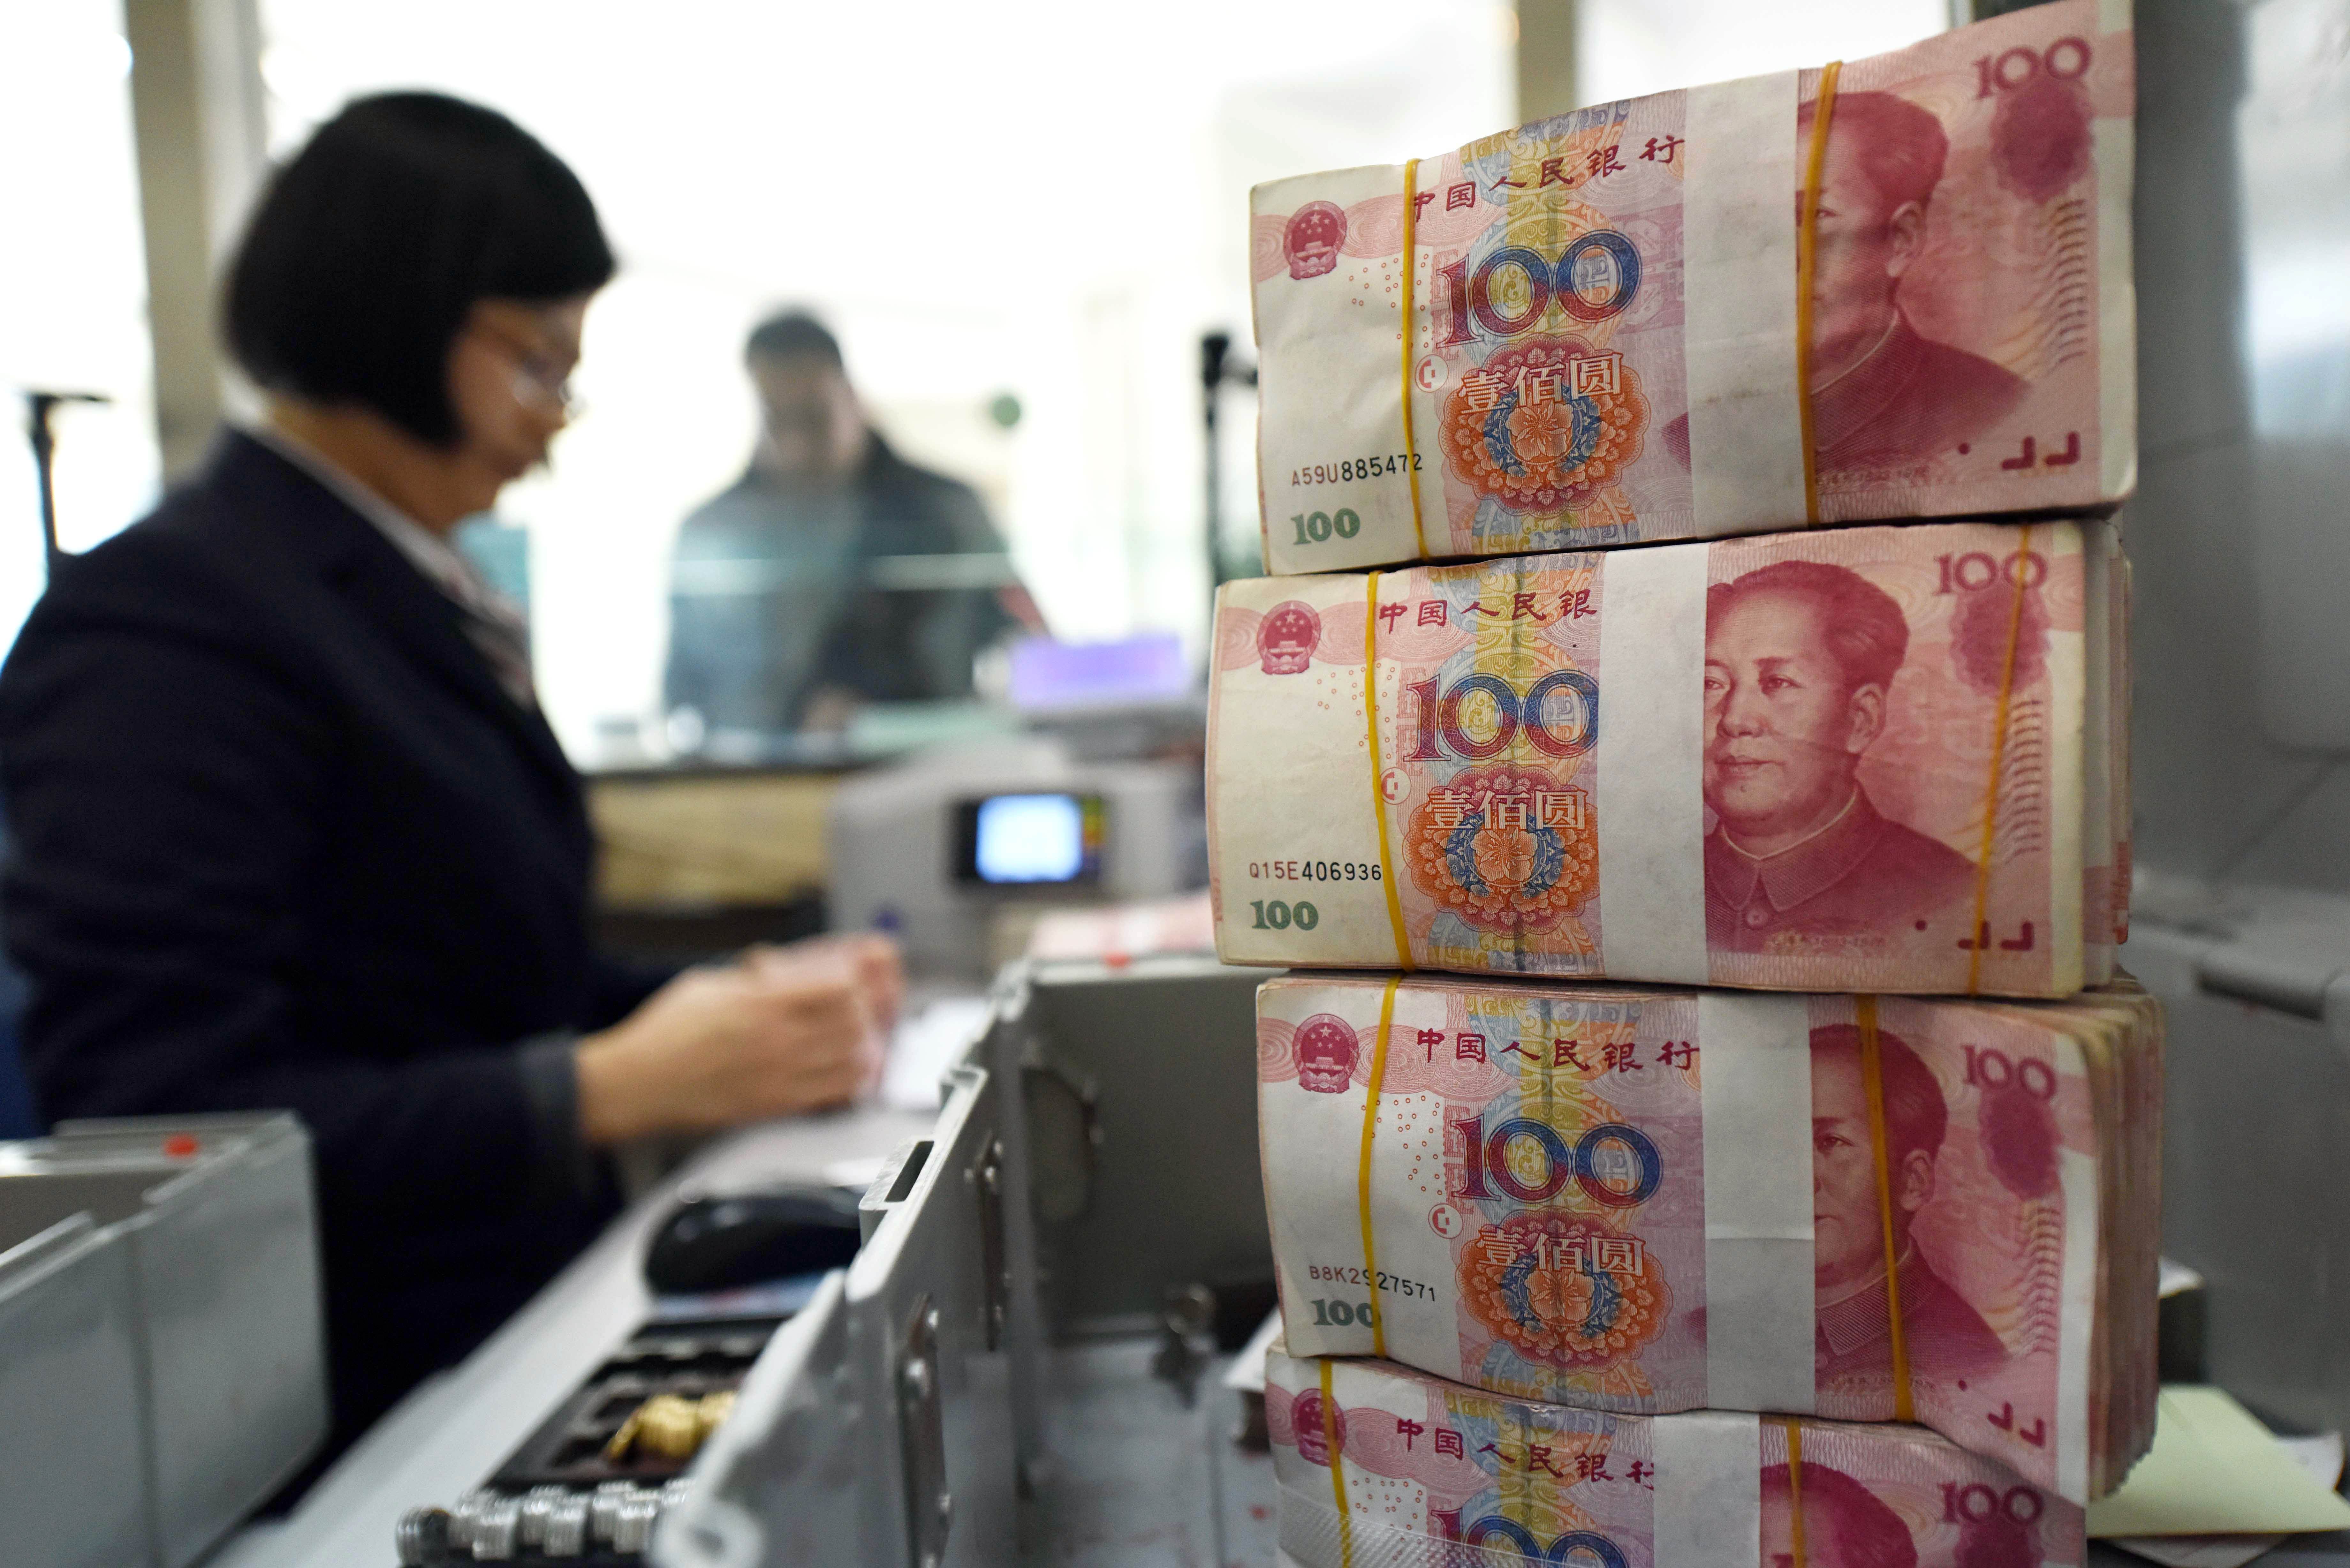 An employee counts 100-yuan (15 USD) banknotes at a bank in Lianyungang, in eastern China's Jiangsu province on January 7, 2016. China weakened the value of its yuan currency by 0.51 percent to 6.5646 against the US dollar on January 7, figures from the China Foreign Exchange Trade System showed. CHINA OUT AFP PHOTO